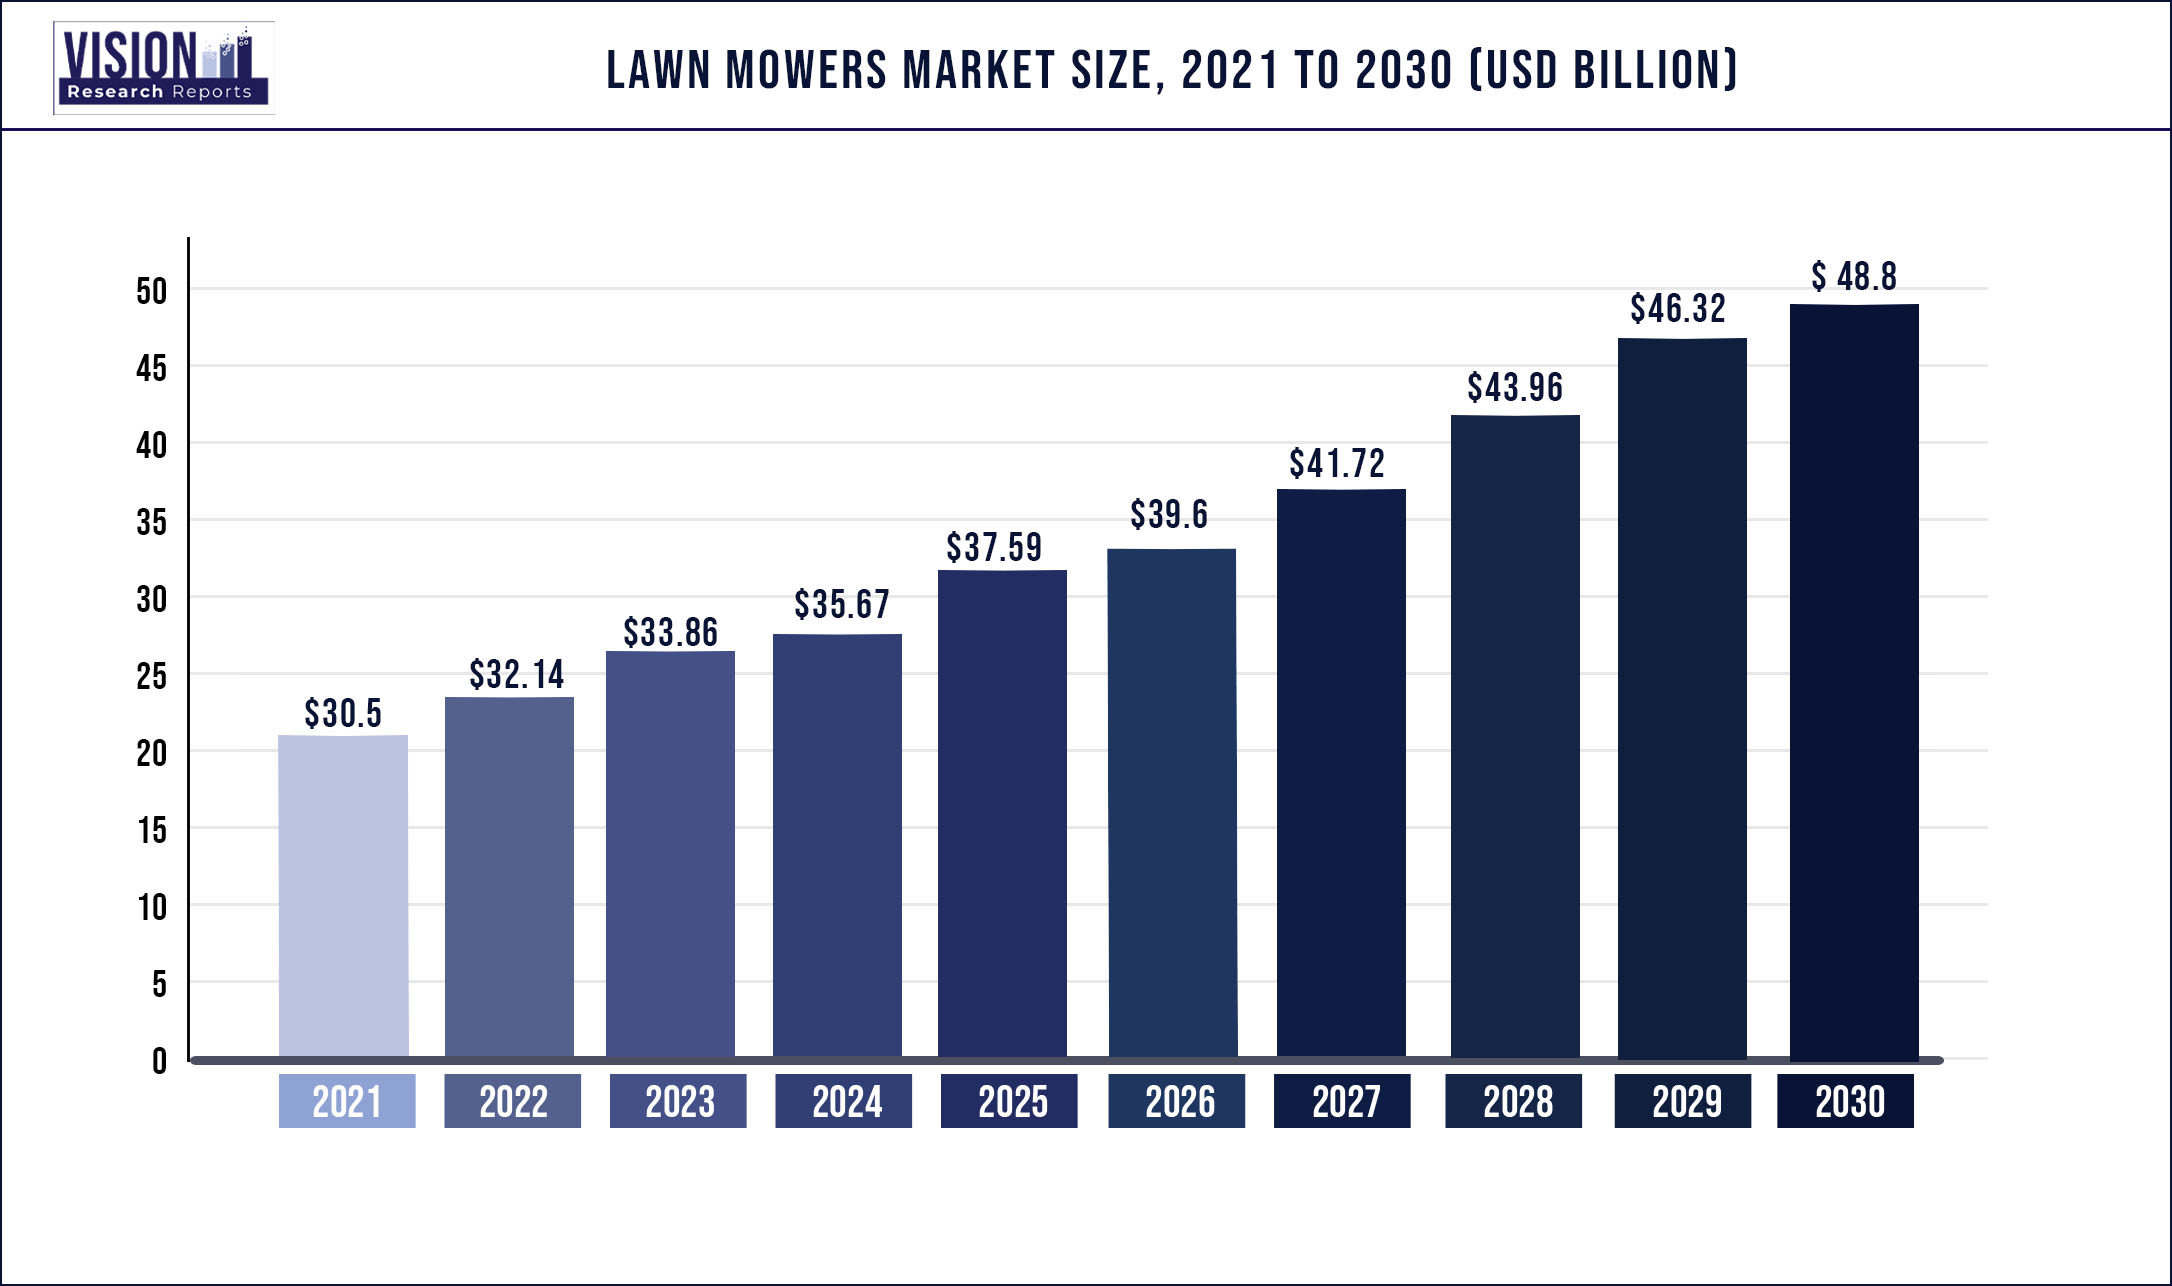 Lawn Mowers Market Size 2021 to 2030